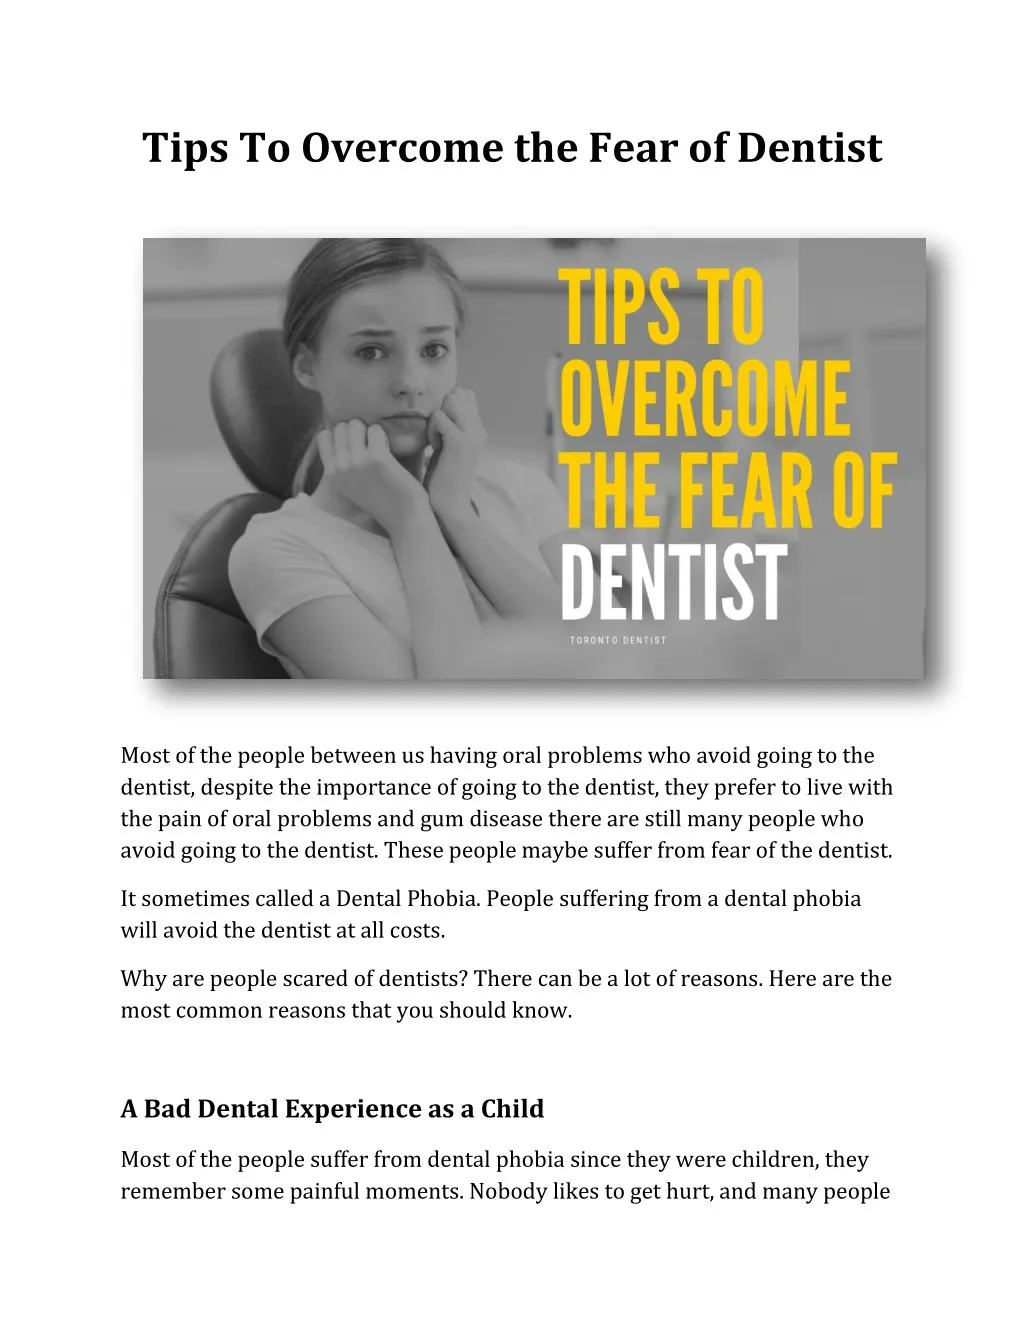 tips to overcome the fear of dentist